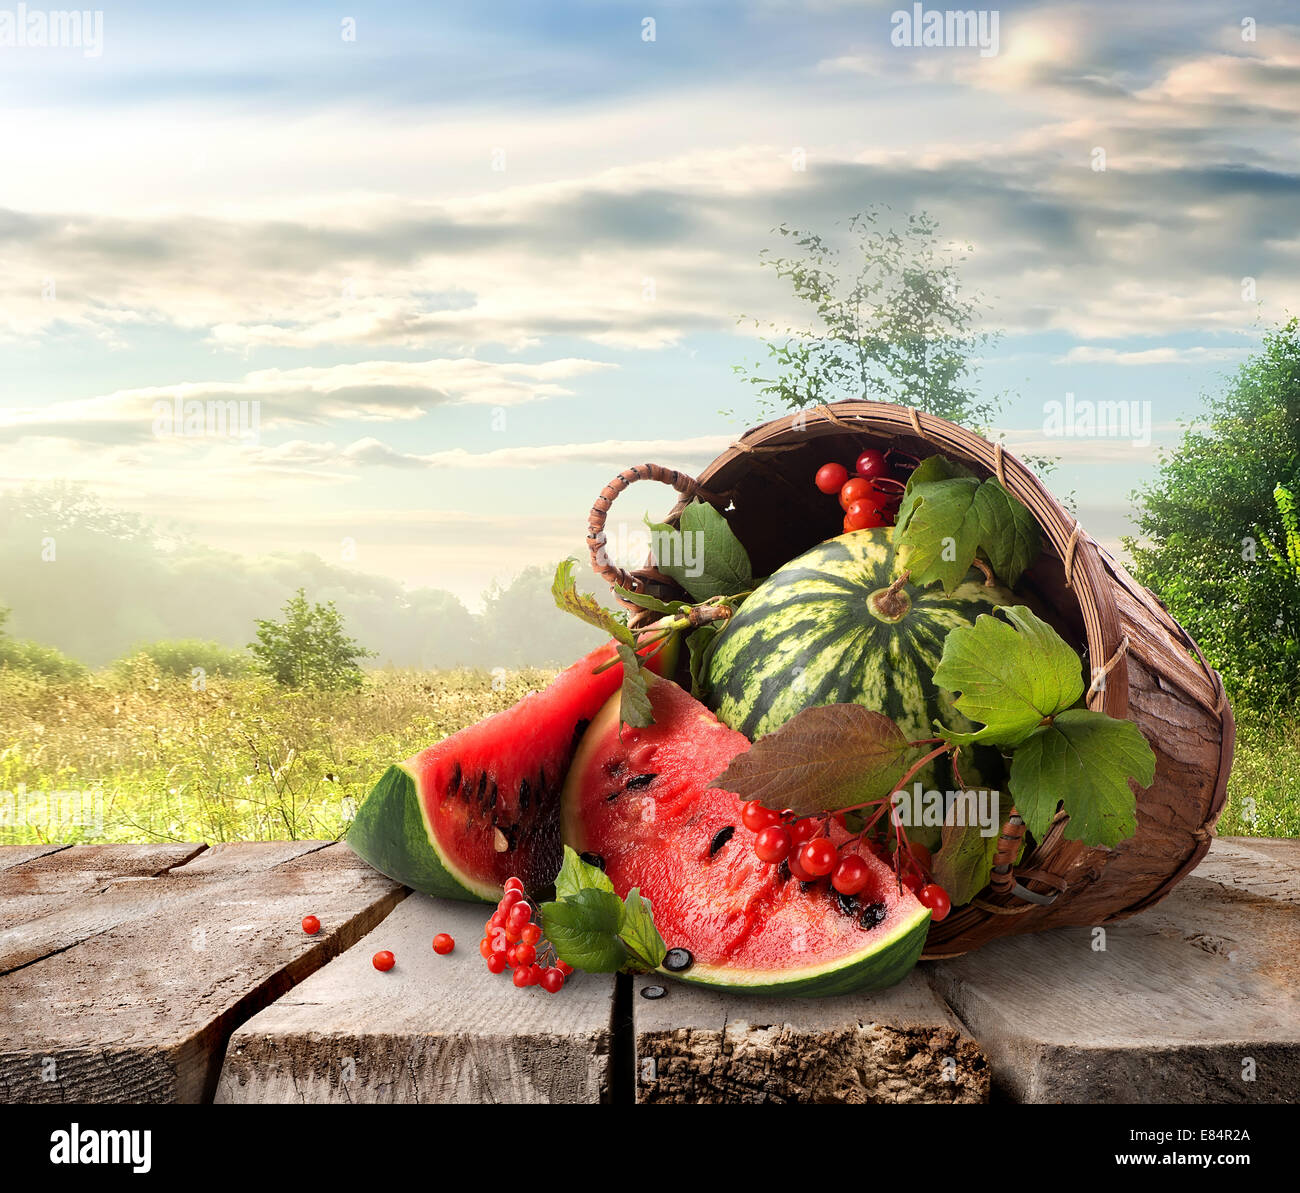 Watermelon in a basket and beautiful landscape Stock Photo